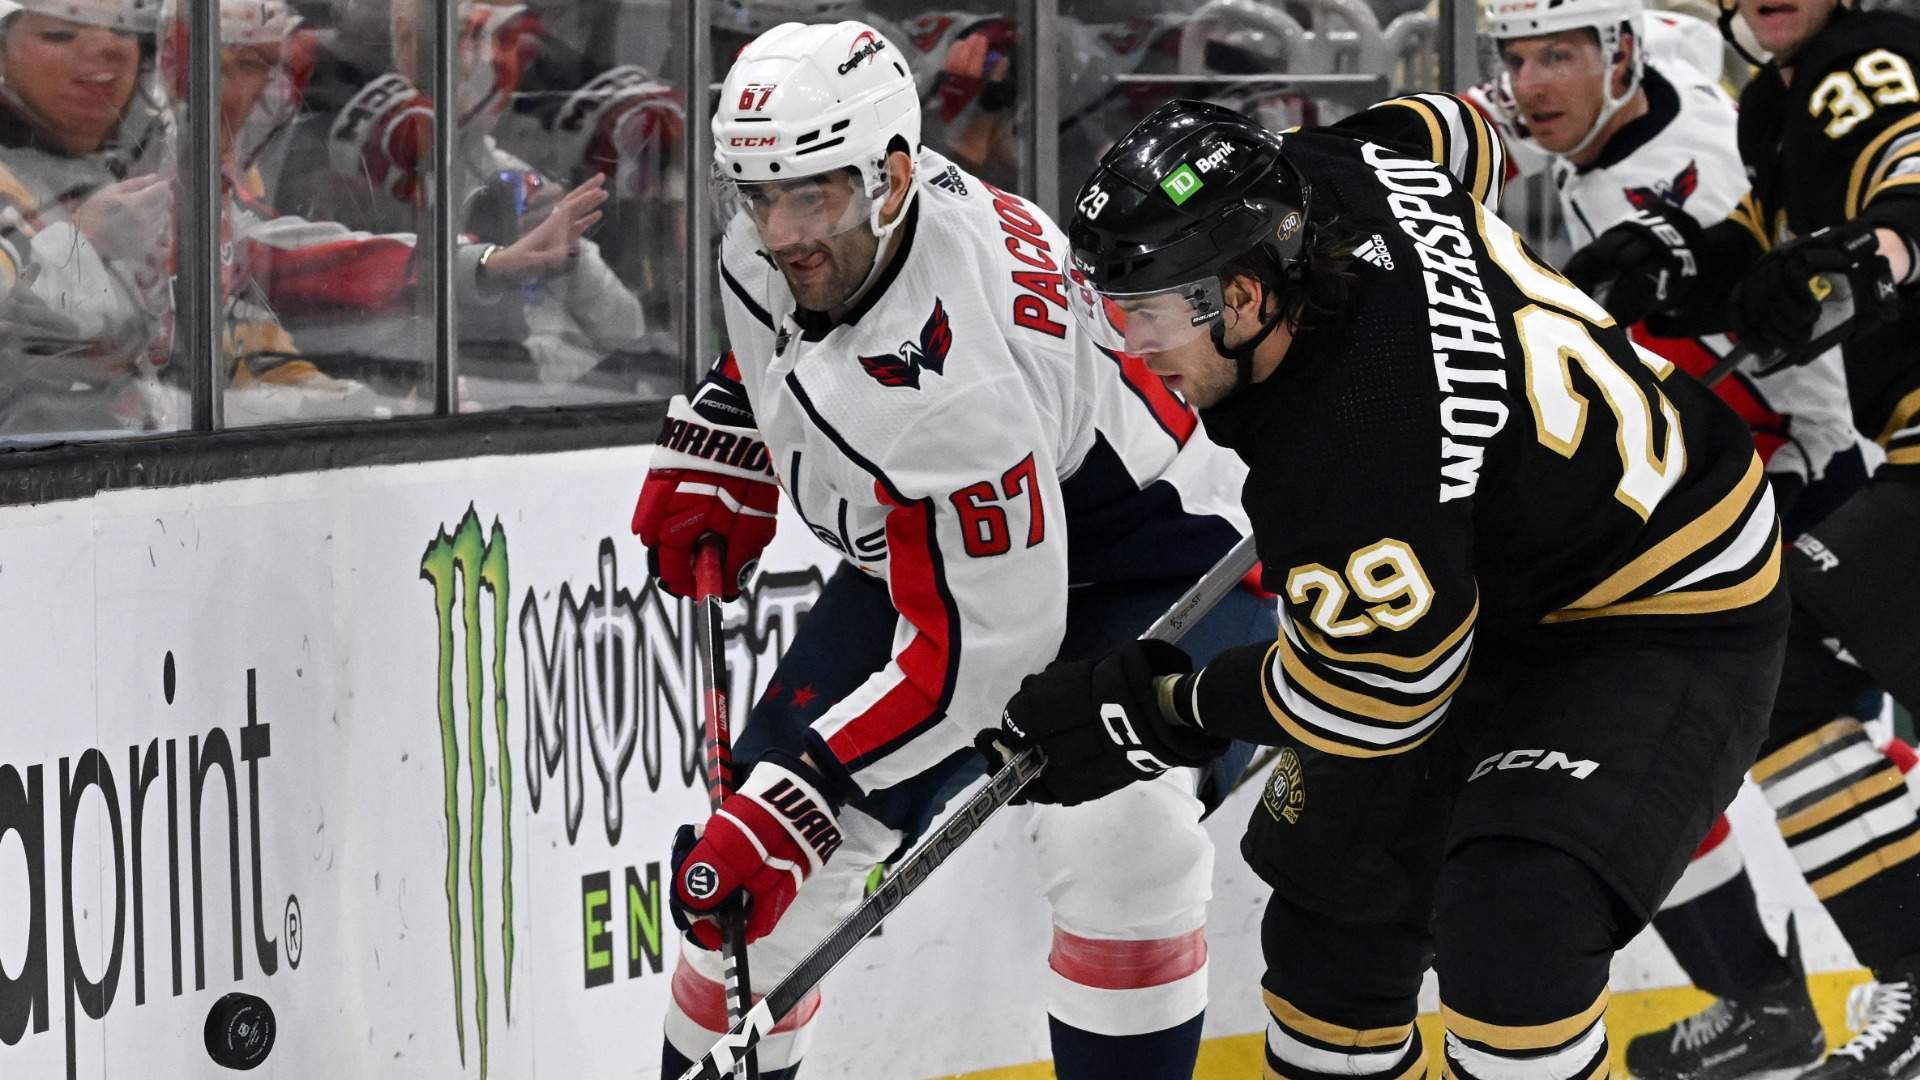 Bruins Notes: Boston Didn't Come Close To Meeting 'Standard' Vs. Capitals